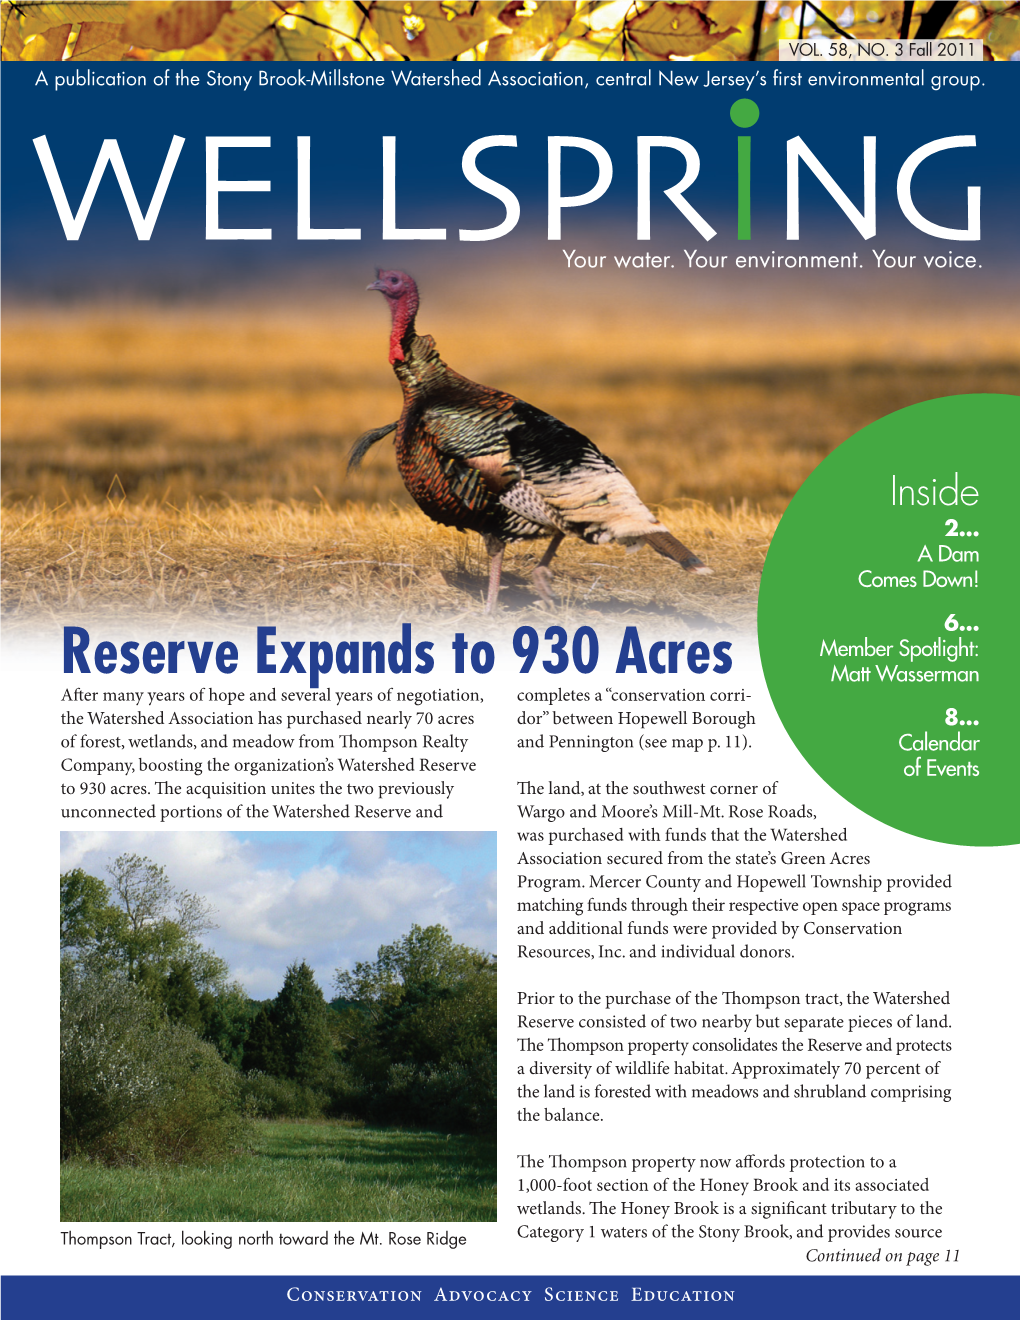 Reserve Expands to 930 Acres